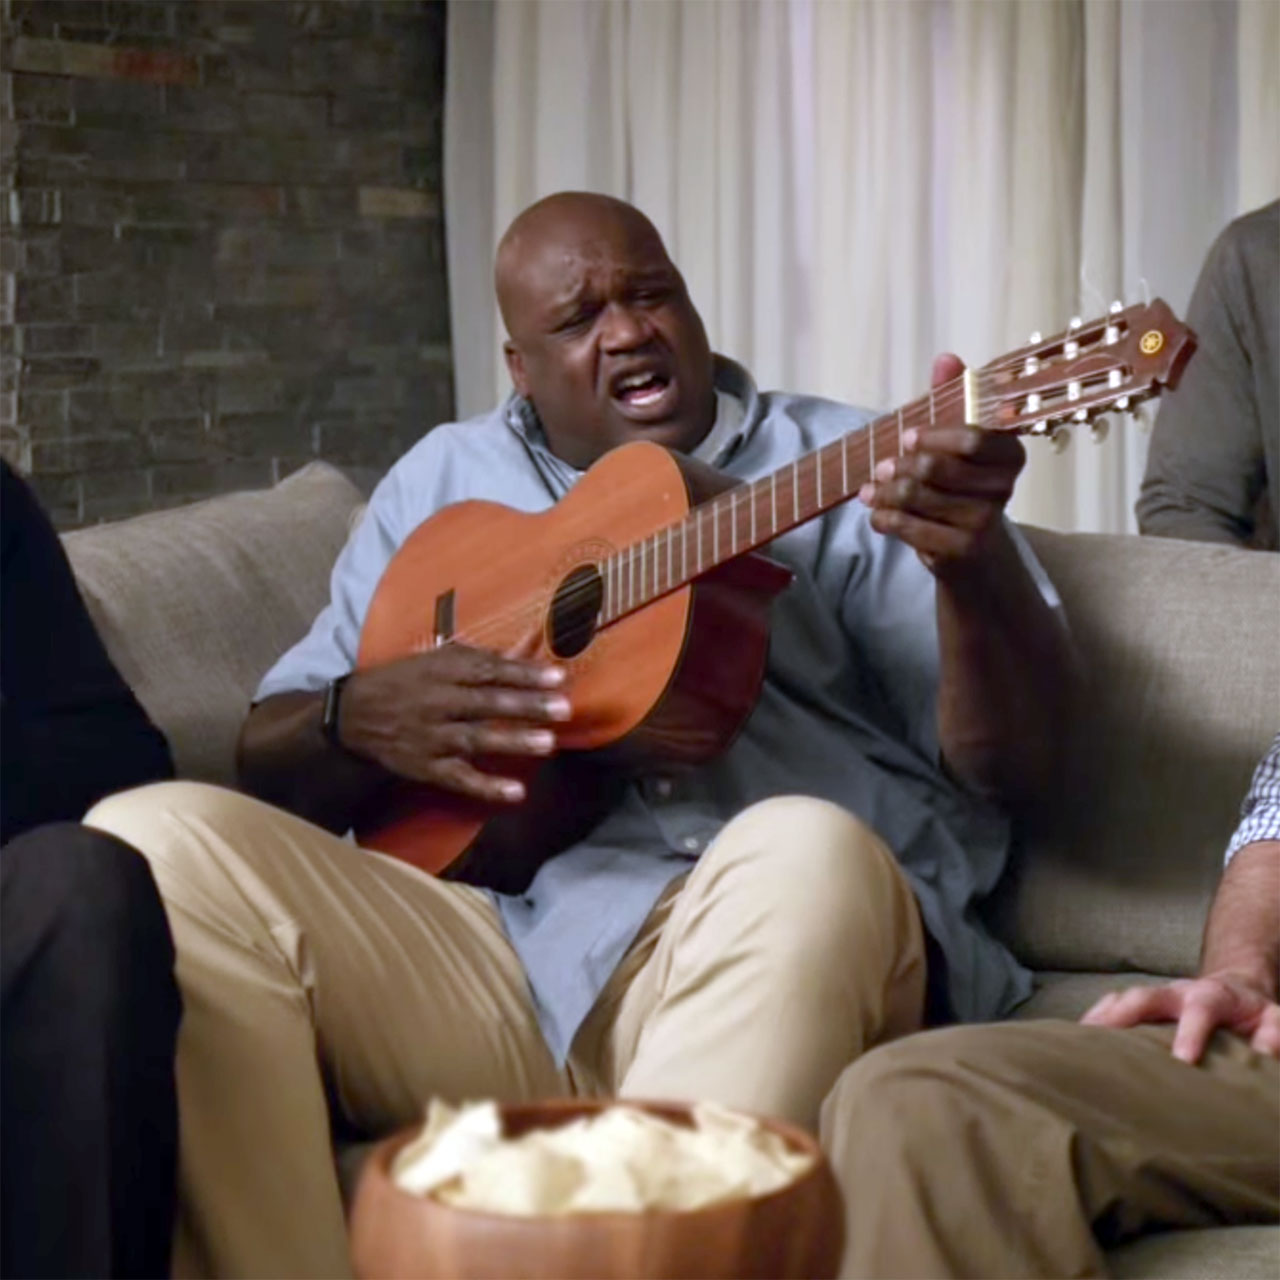 Fight Song Played by Shaq for March Madness ad